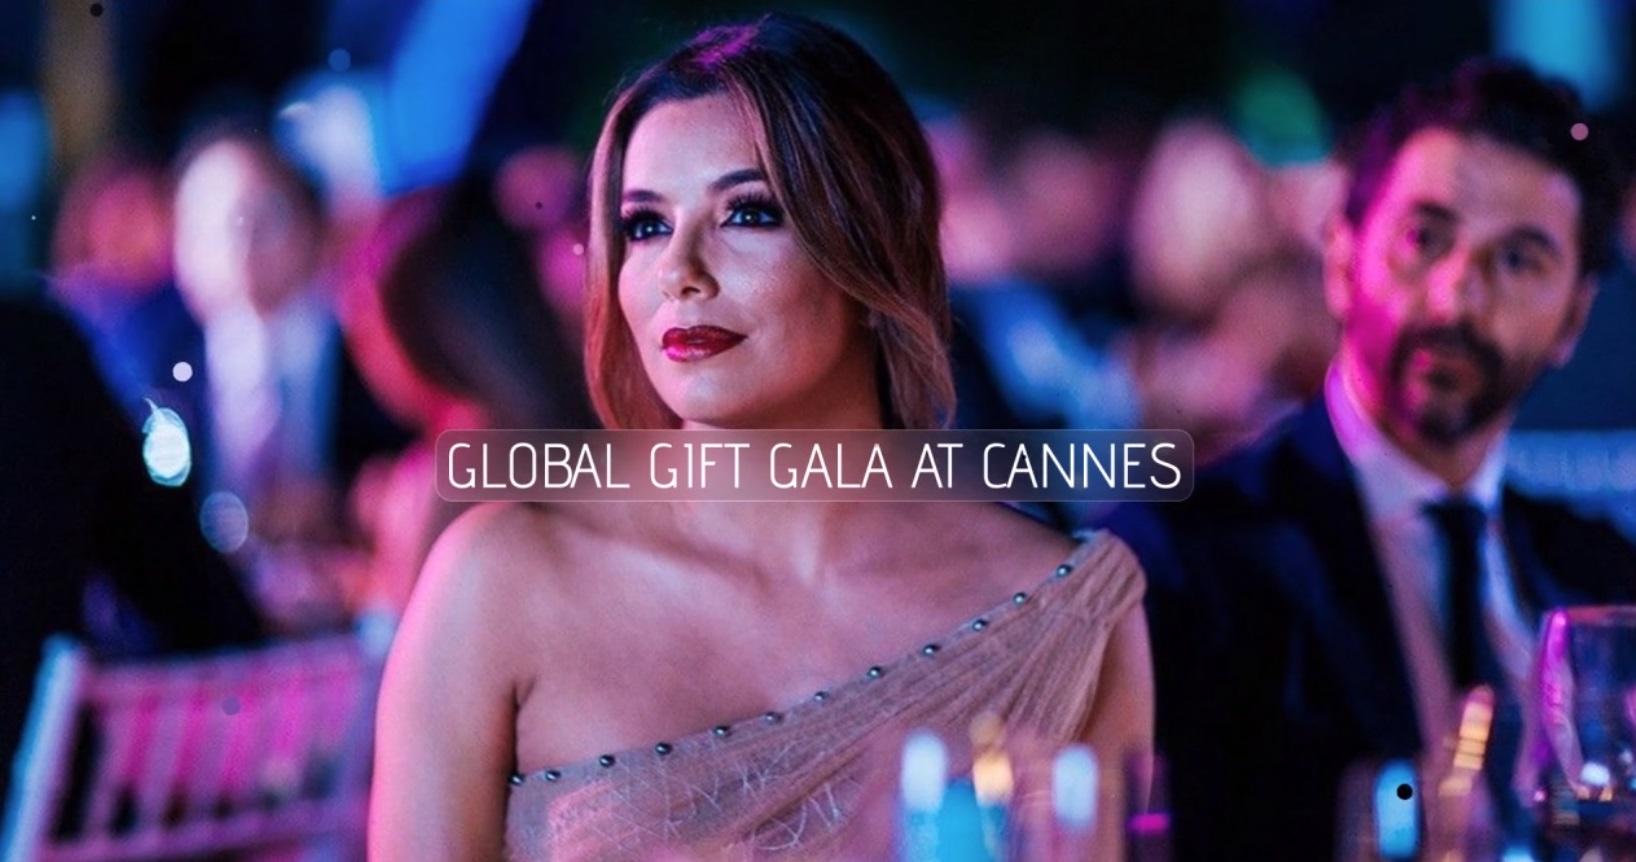 Eva Longoria global gift gala VIP tickets and hospitality packages